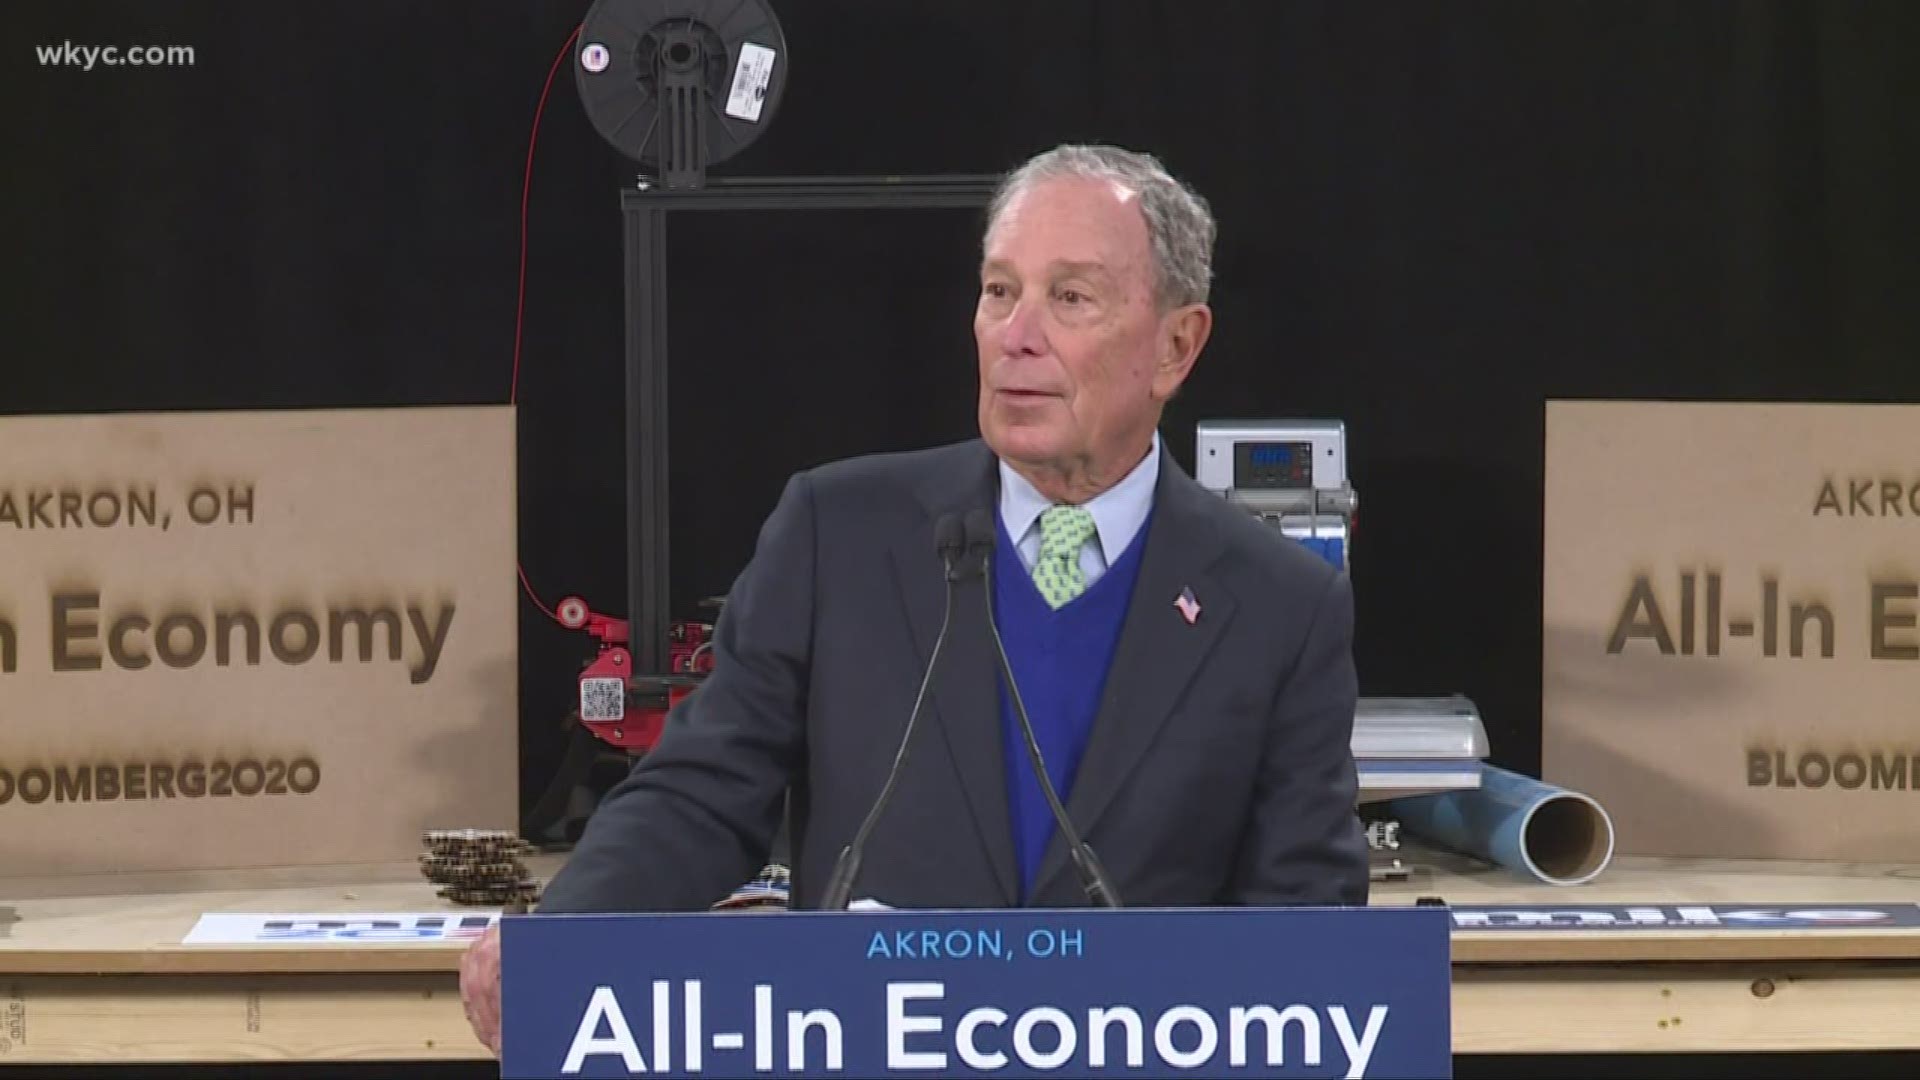 Former New York Mayor Mike Bloomberg held an "Ohio kick-off" event Wednesday evening at Bounce Innovation Hub in Akron.